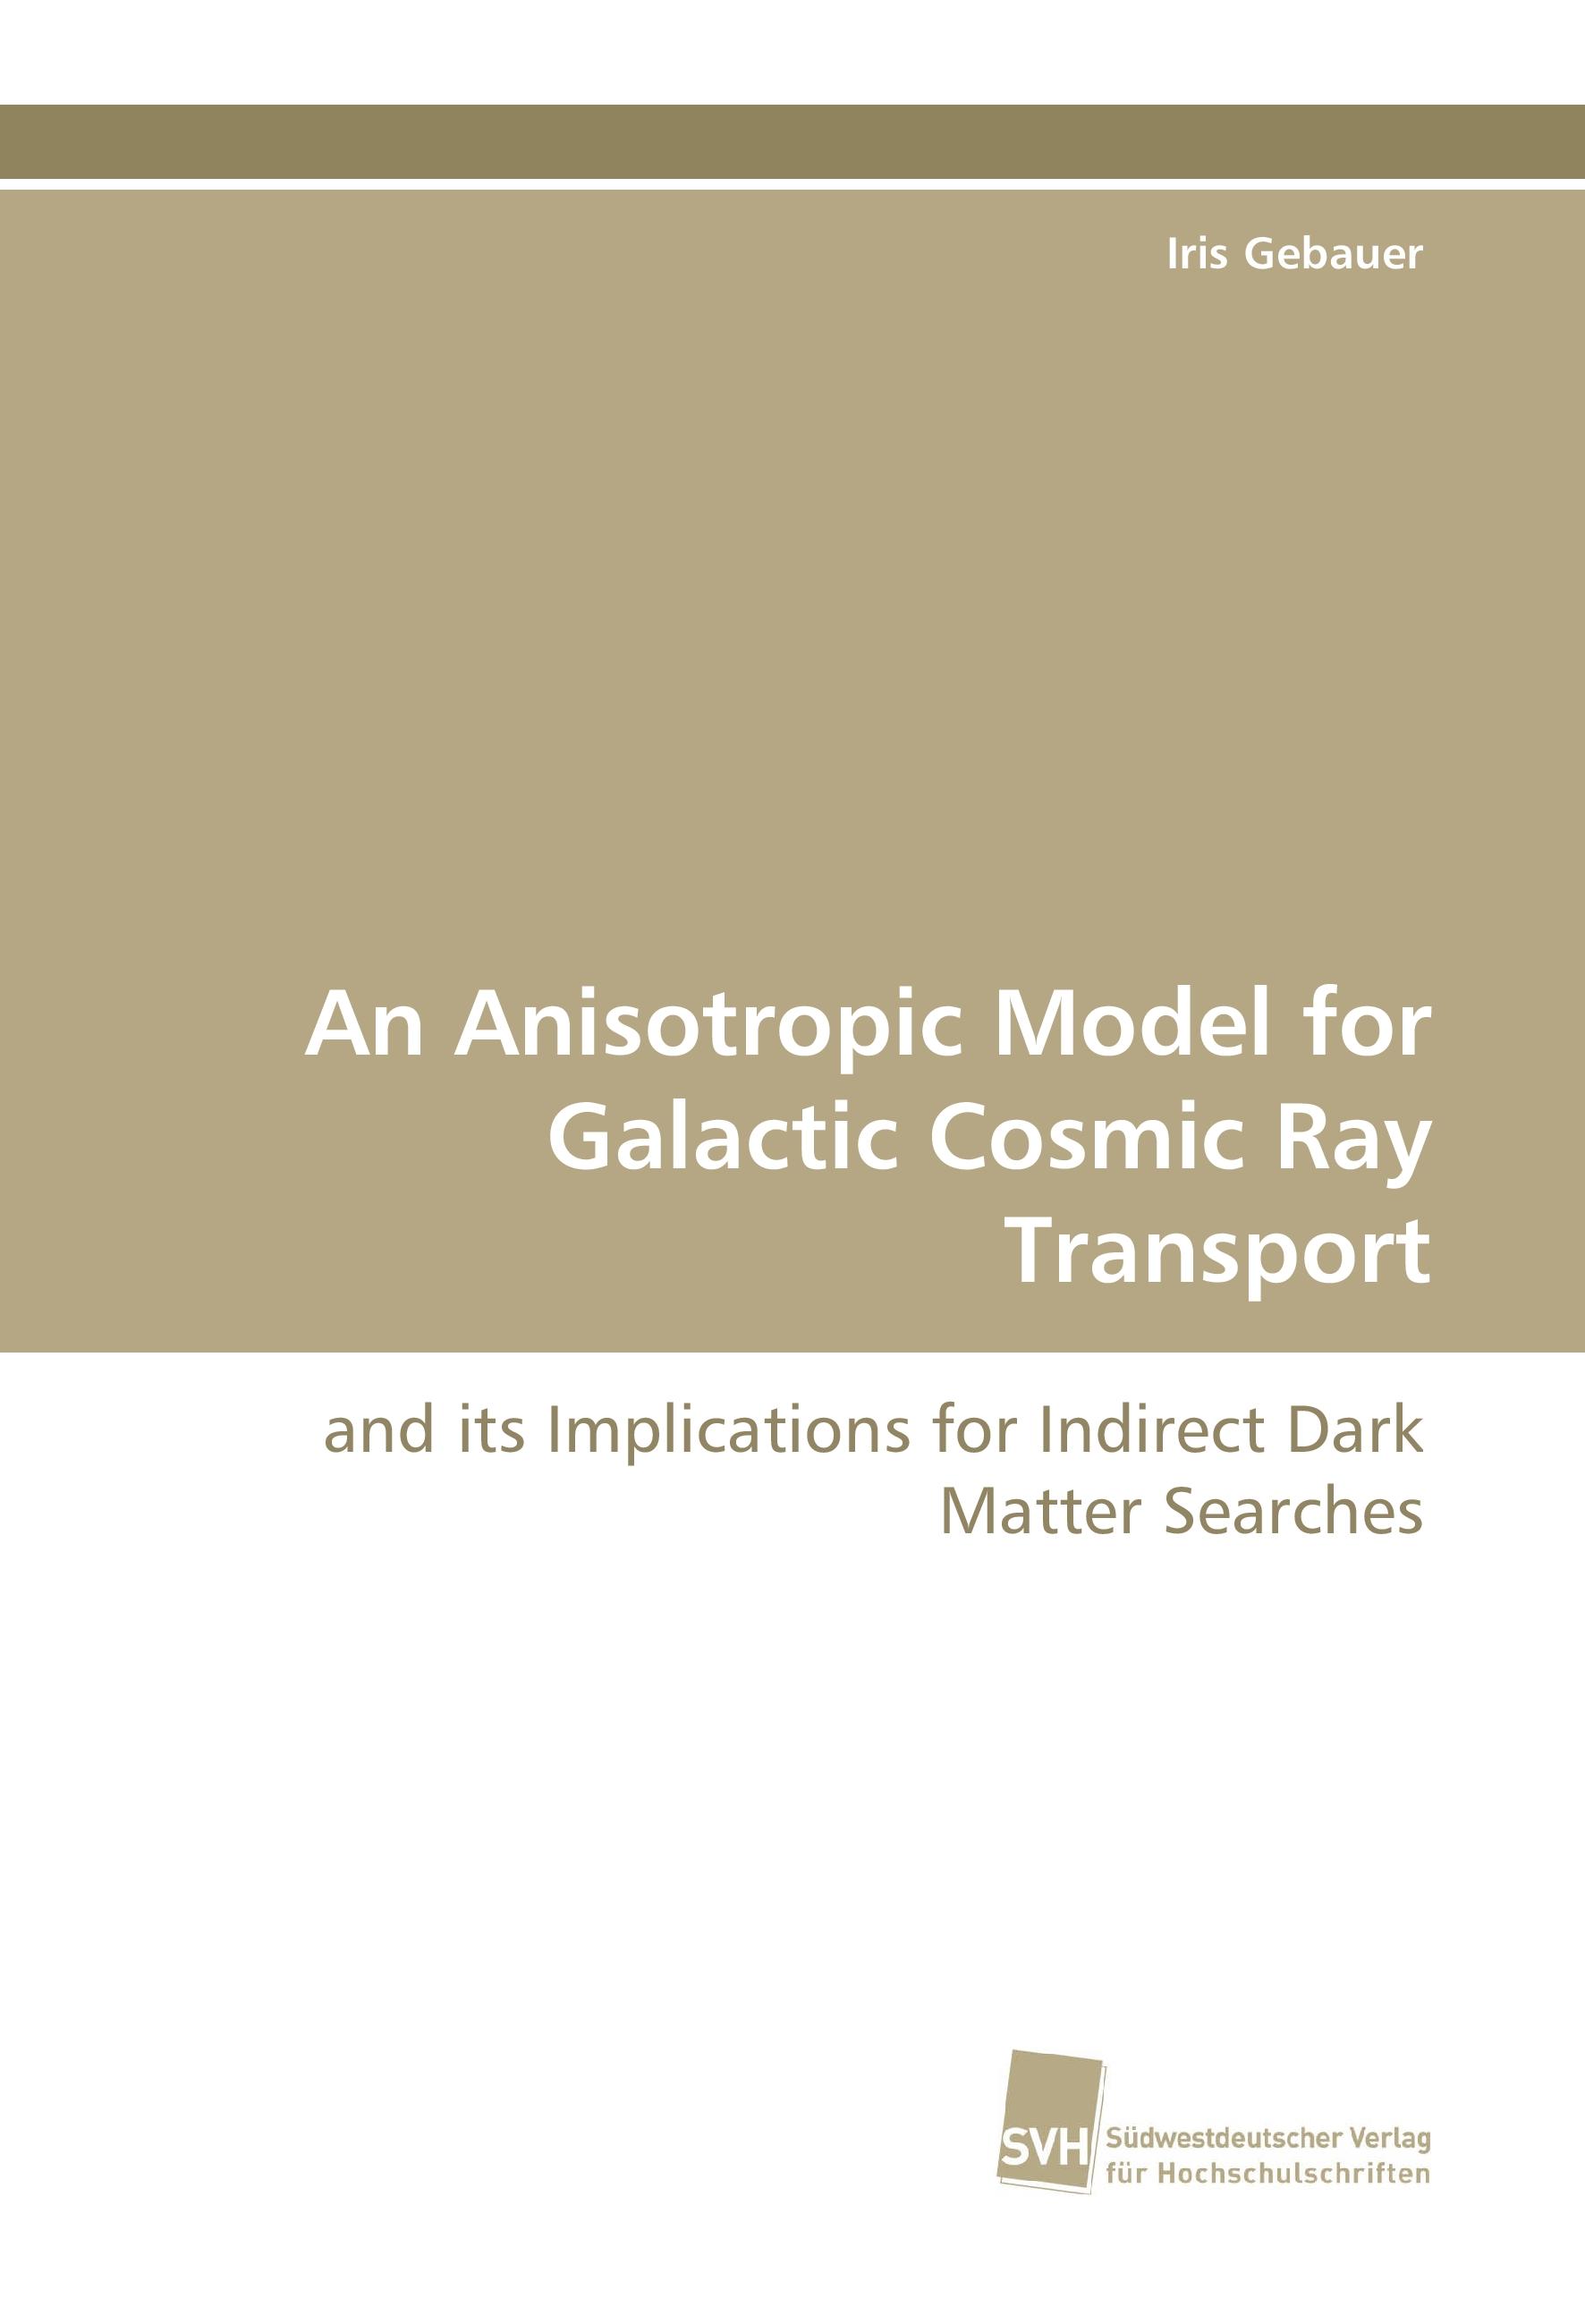 An Anisotropic Model for Galactic Cosmic Ray Transport - Iris Gebauer